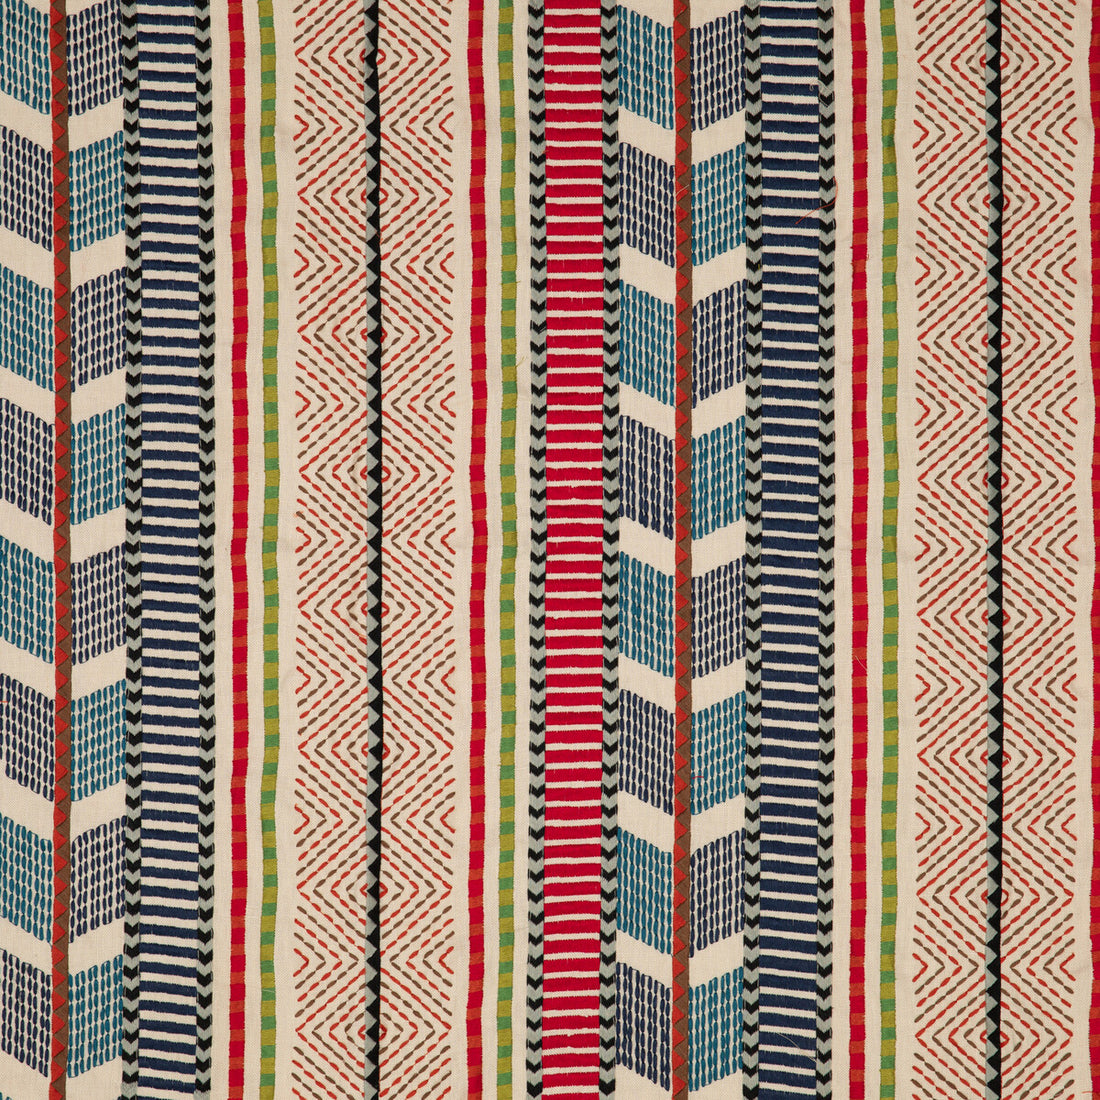 Rebozo fabric in multi color - pattern PF50472.1.0 - by Baker Lifestyle in the Fiesta collection